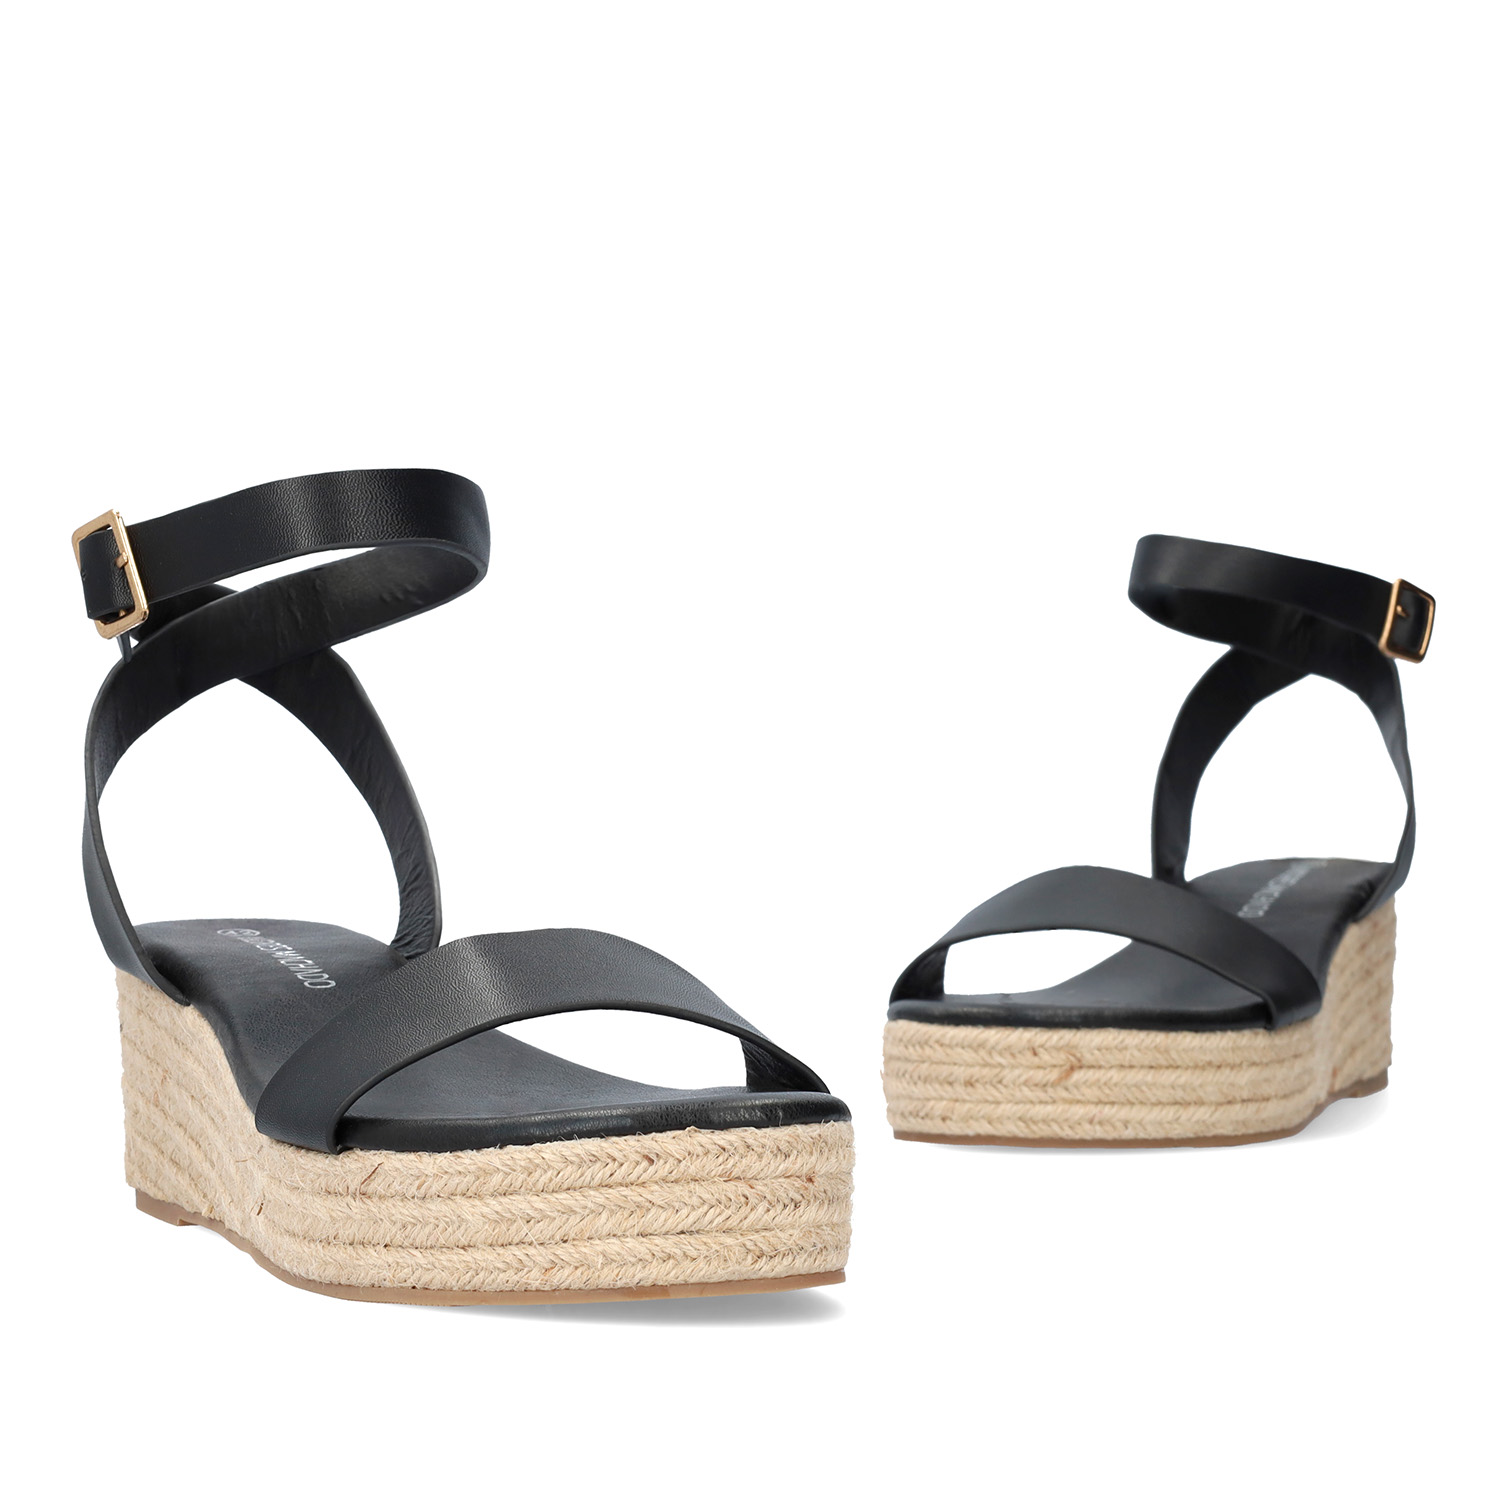 Black soft sandals with a jute wedge 